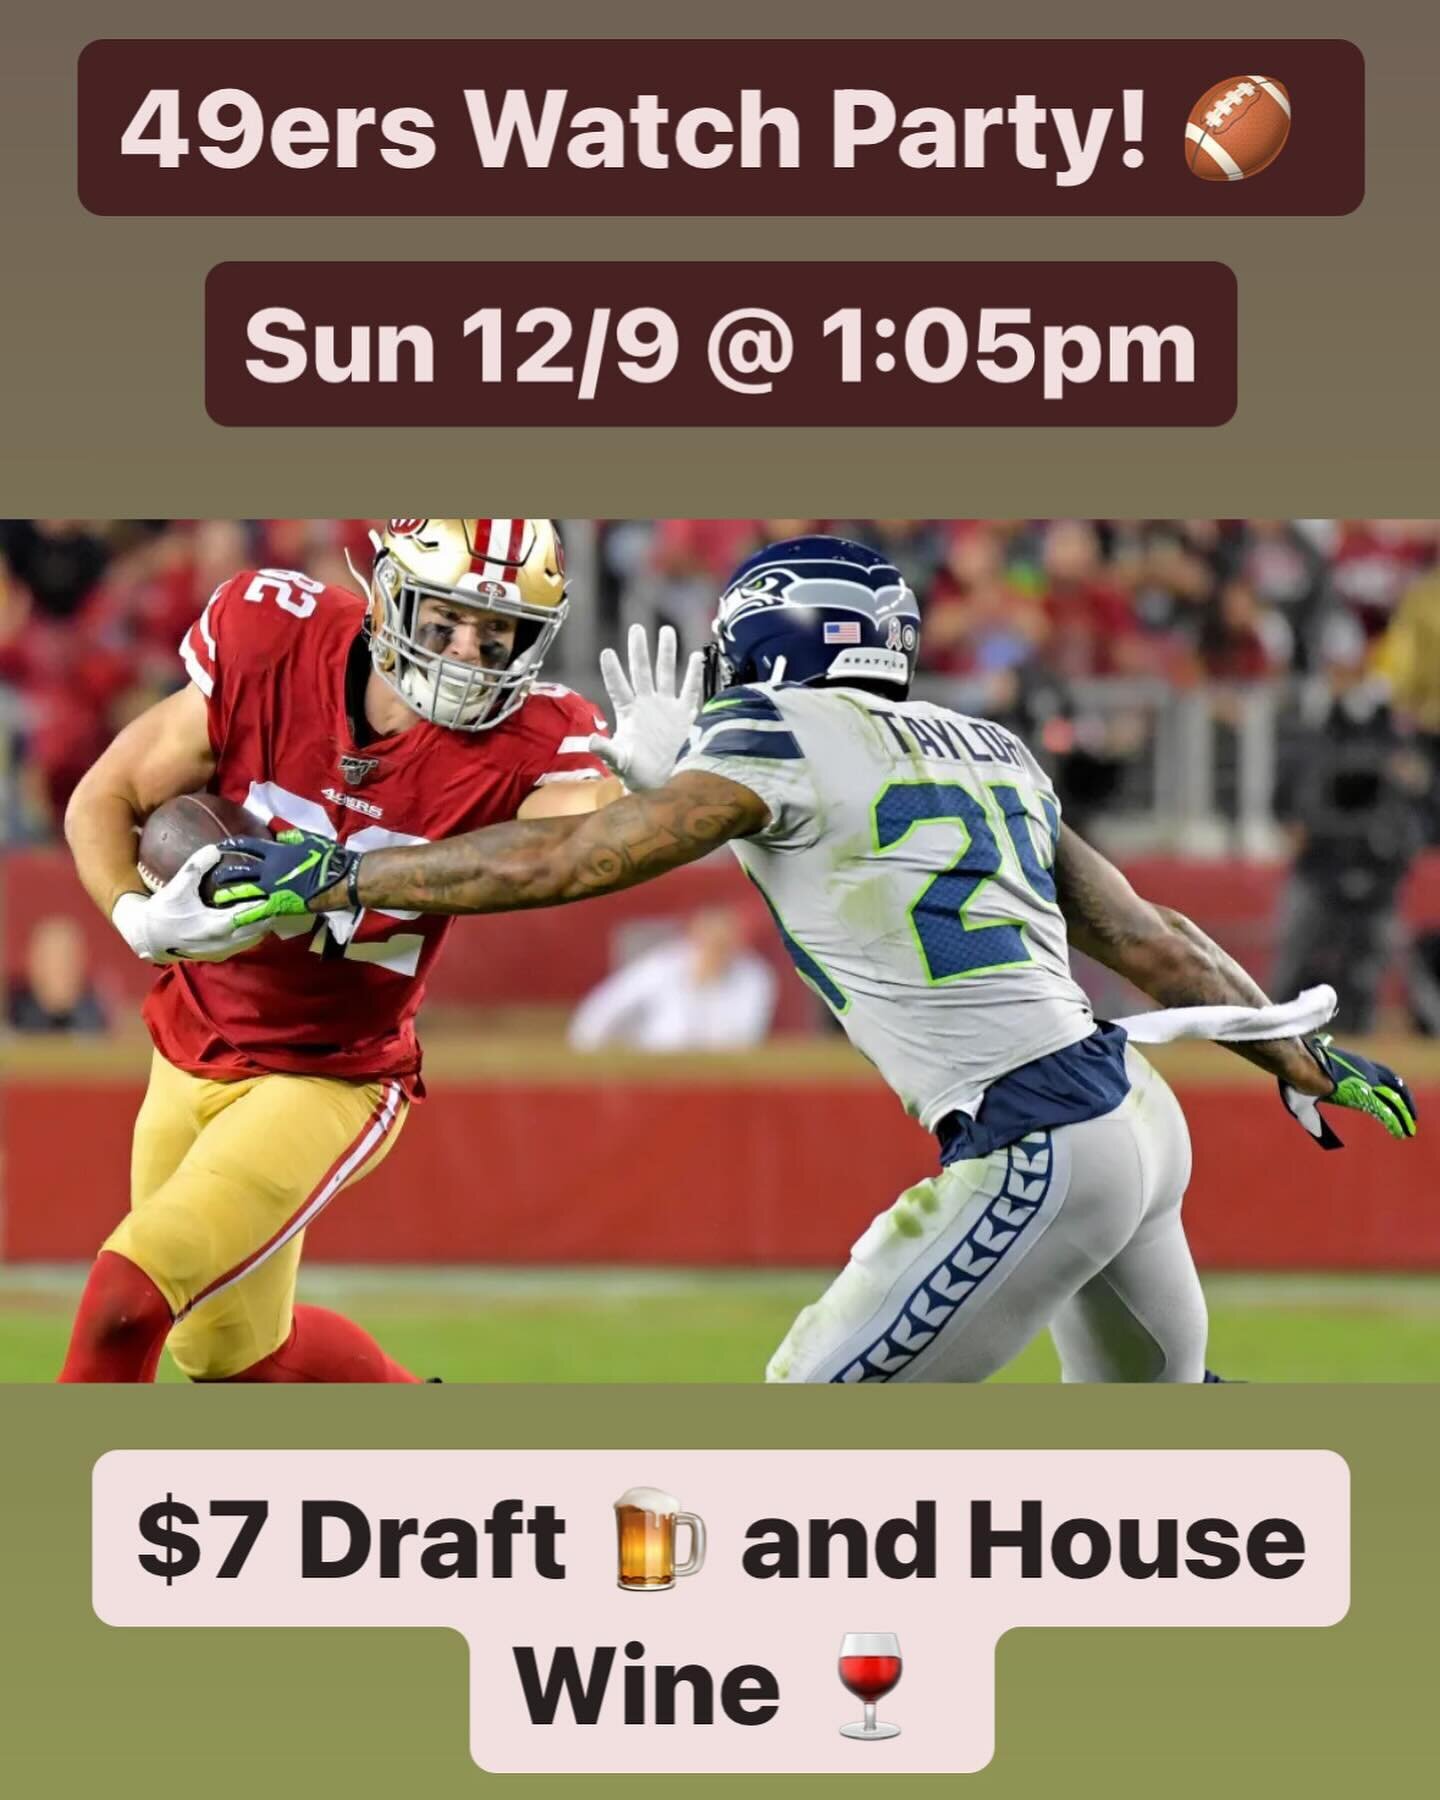 Come cheer on the 9ers with us! 🏈 🍺 🍷 #paradisebeachcapitola #footballsunday #goniners